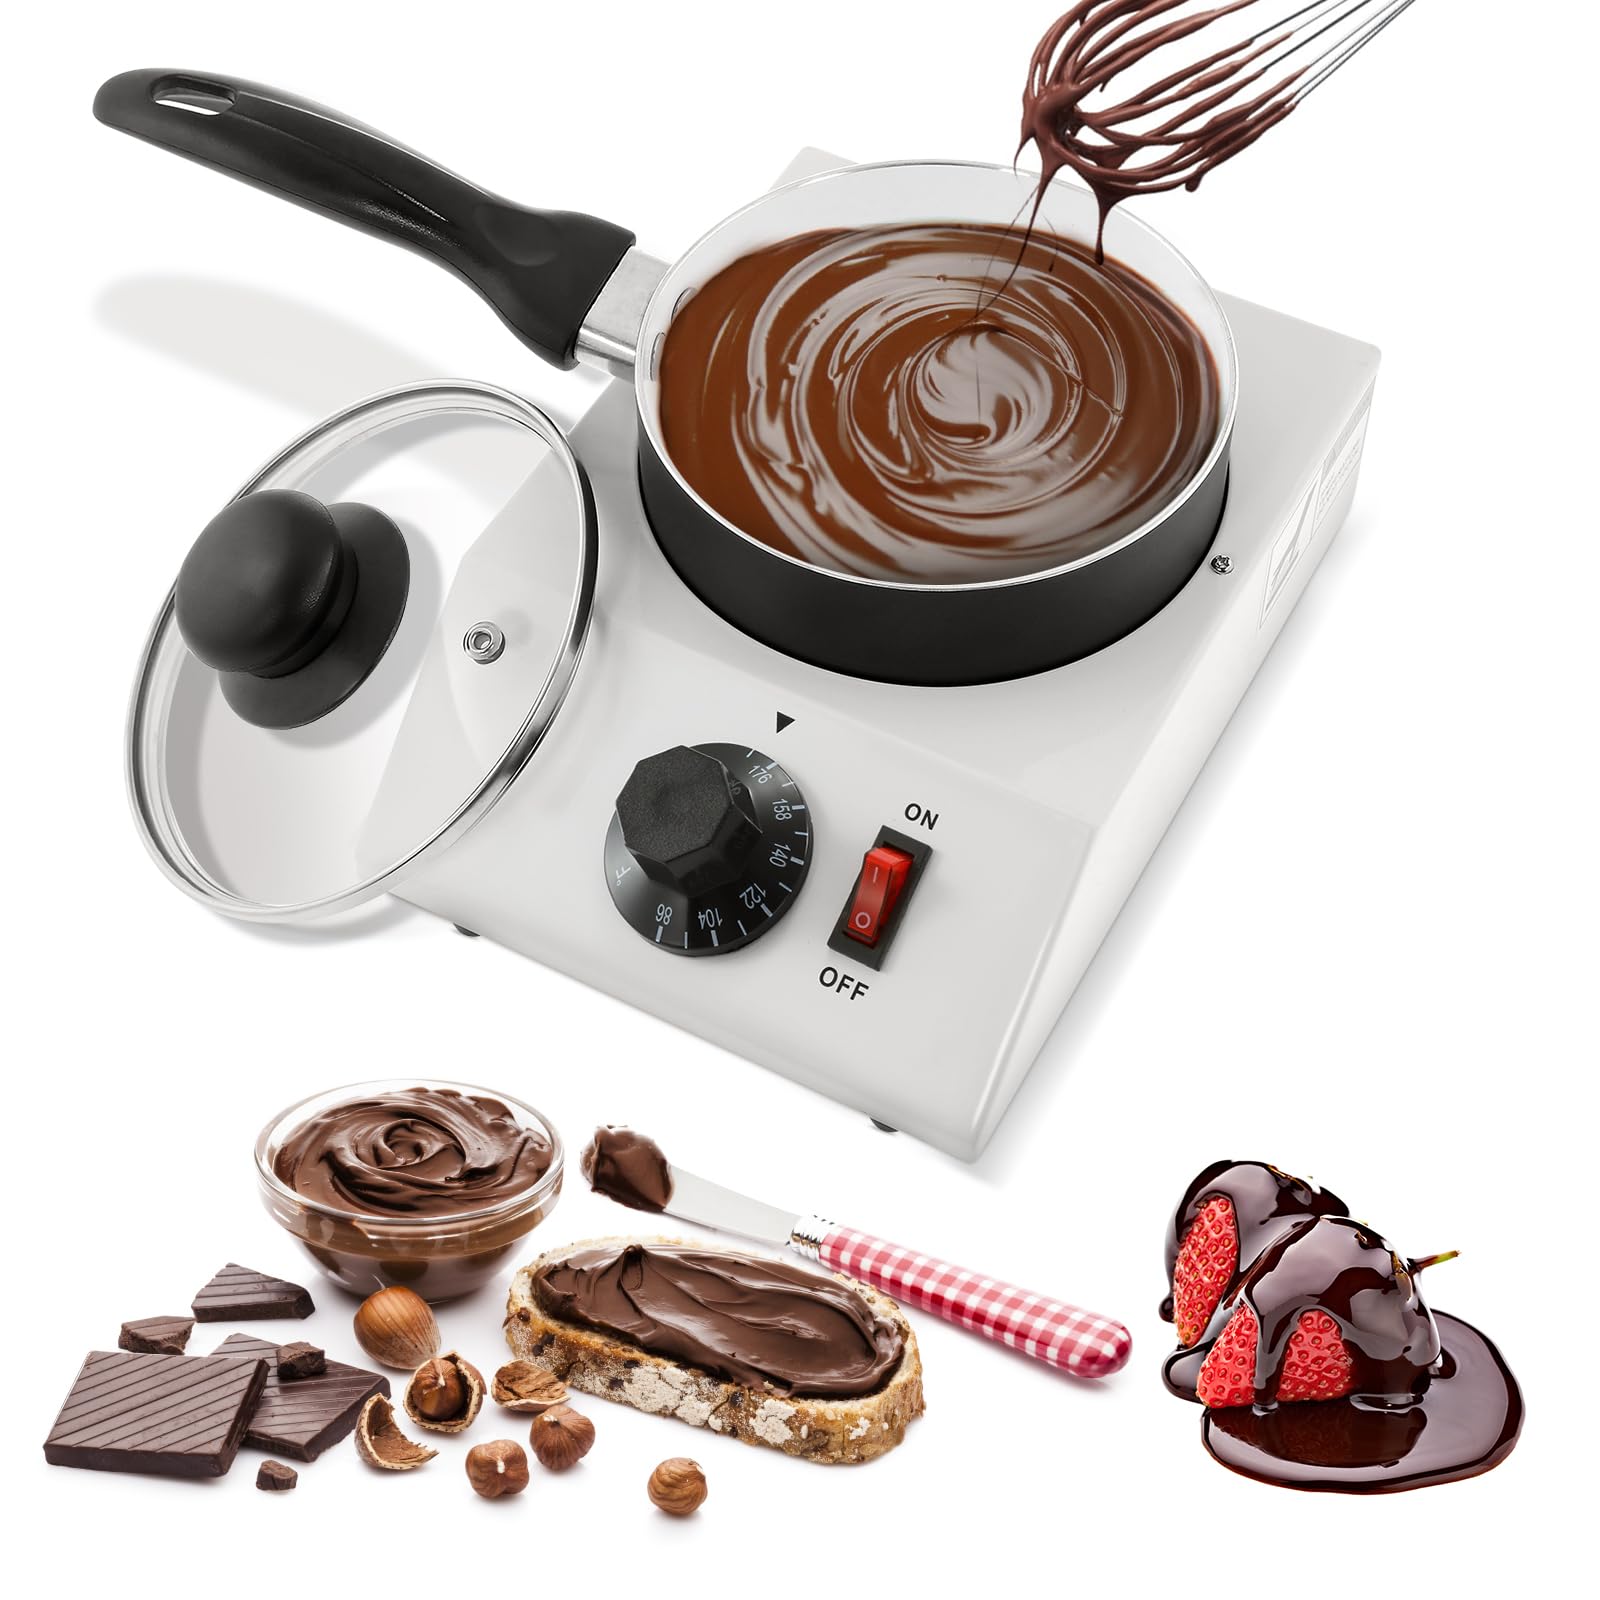 WICHEMI Chocolate Melting Pot Chocolate Tempering Machine Commercial Electric Chocolate Melter Fondue Pot for Chocolate Butter Cheese Cream Candy Milk